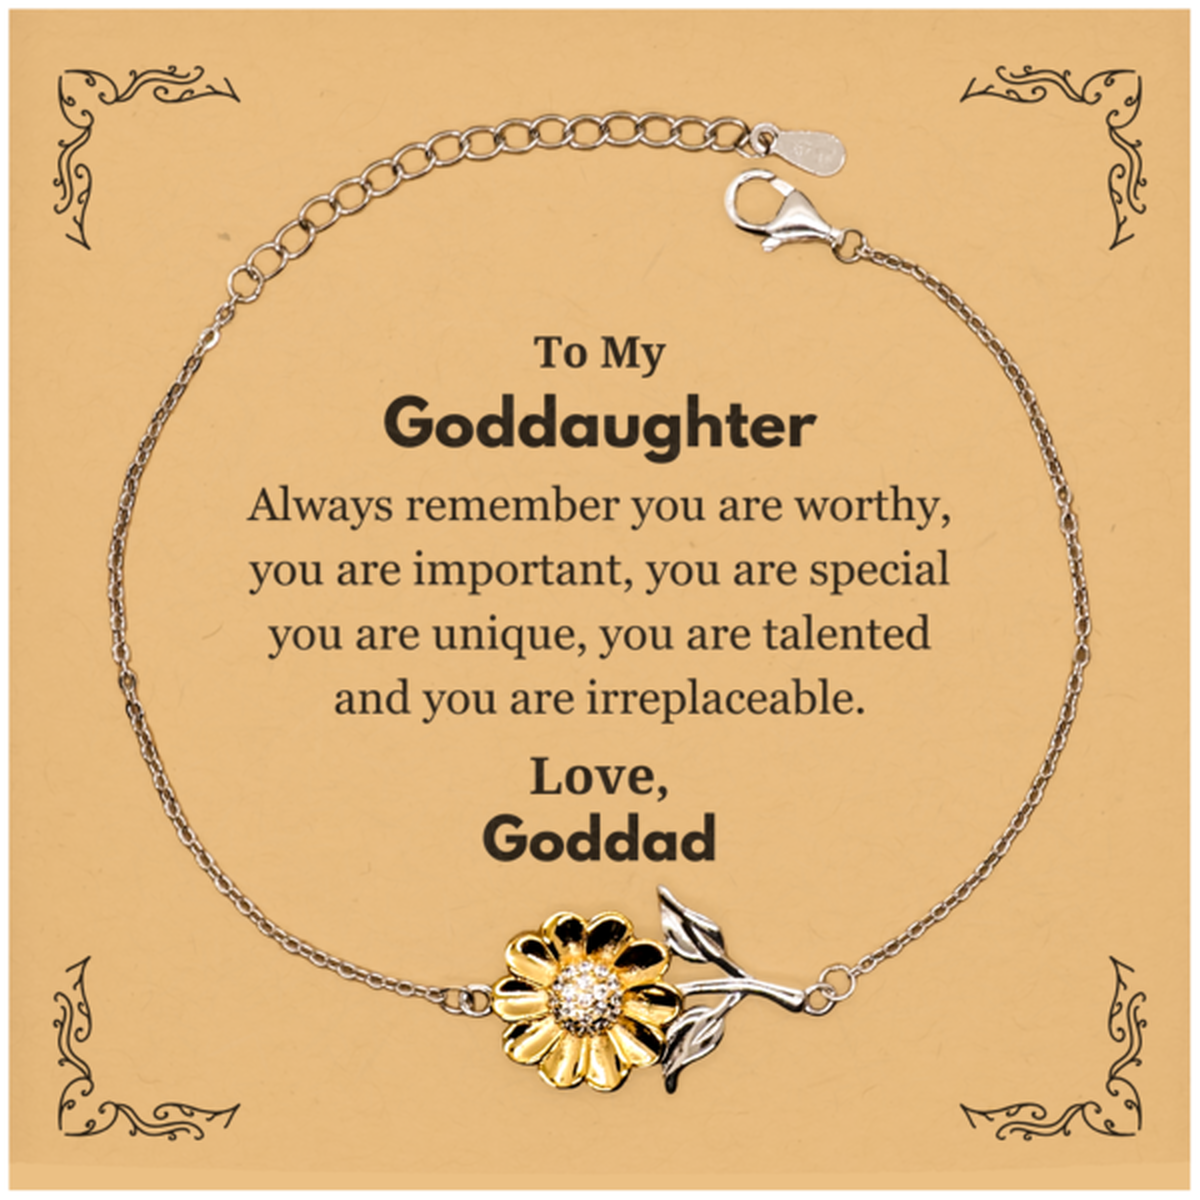 Goddaughter Birthday Gifts from Goddad, Inspirational Sunflower Bracelet for Goddaughter Christmas Graduation Gifts for Goddaughter Always remember you are worthy, you are important. Love, Goddad